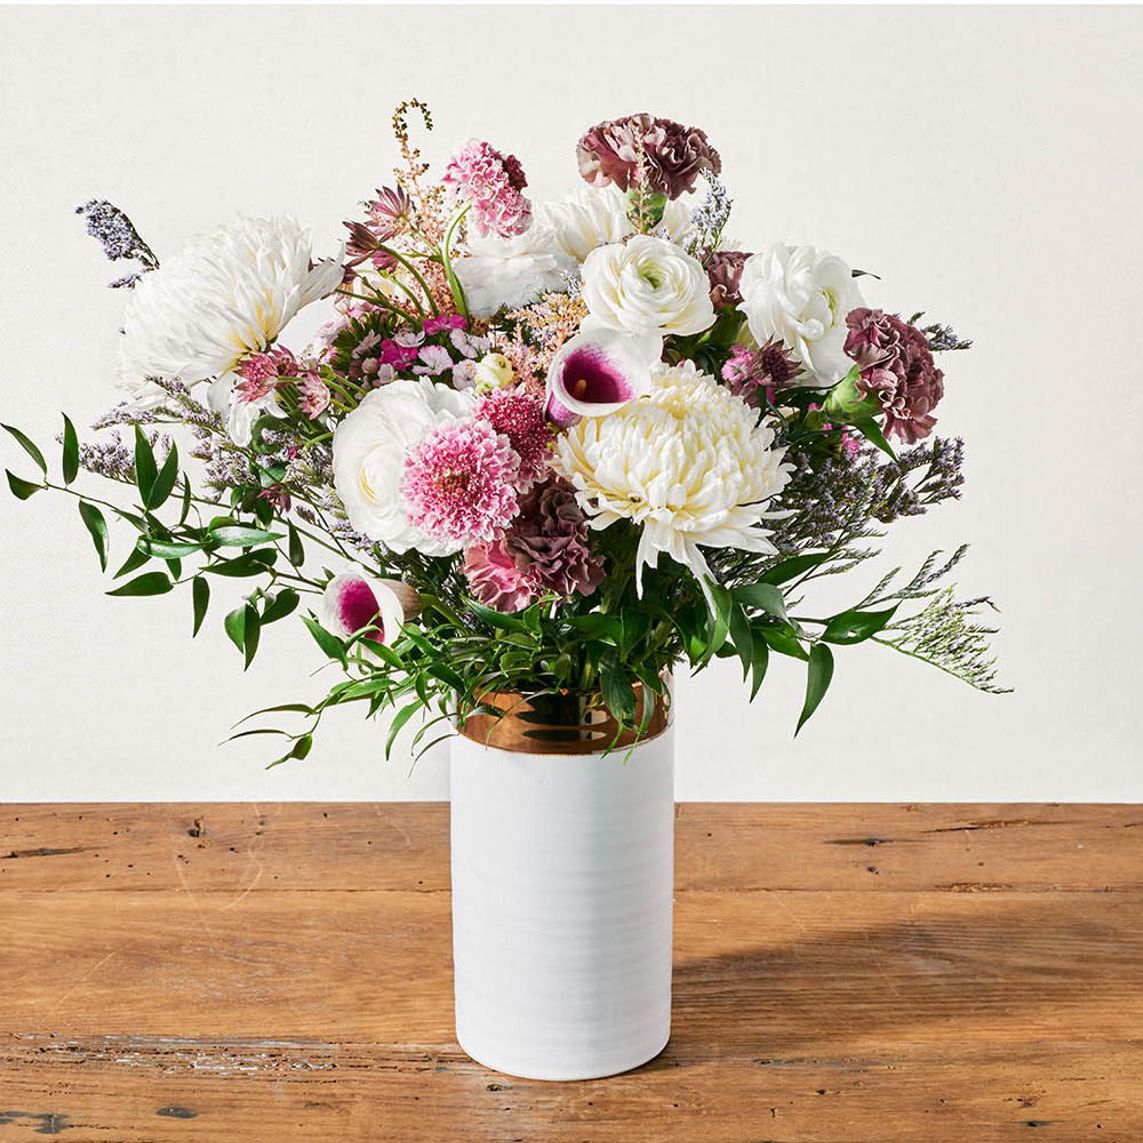 6 Best Flower Delivery Services 19 The Strategist New York Magazine